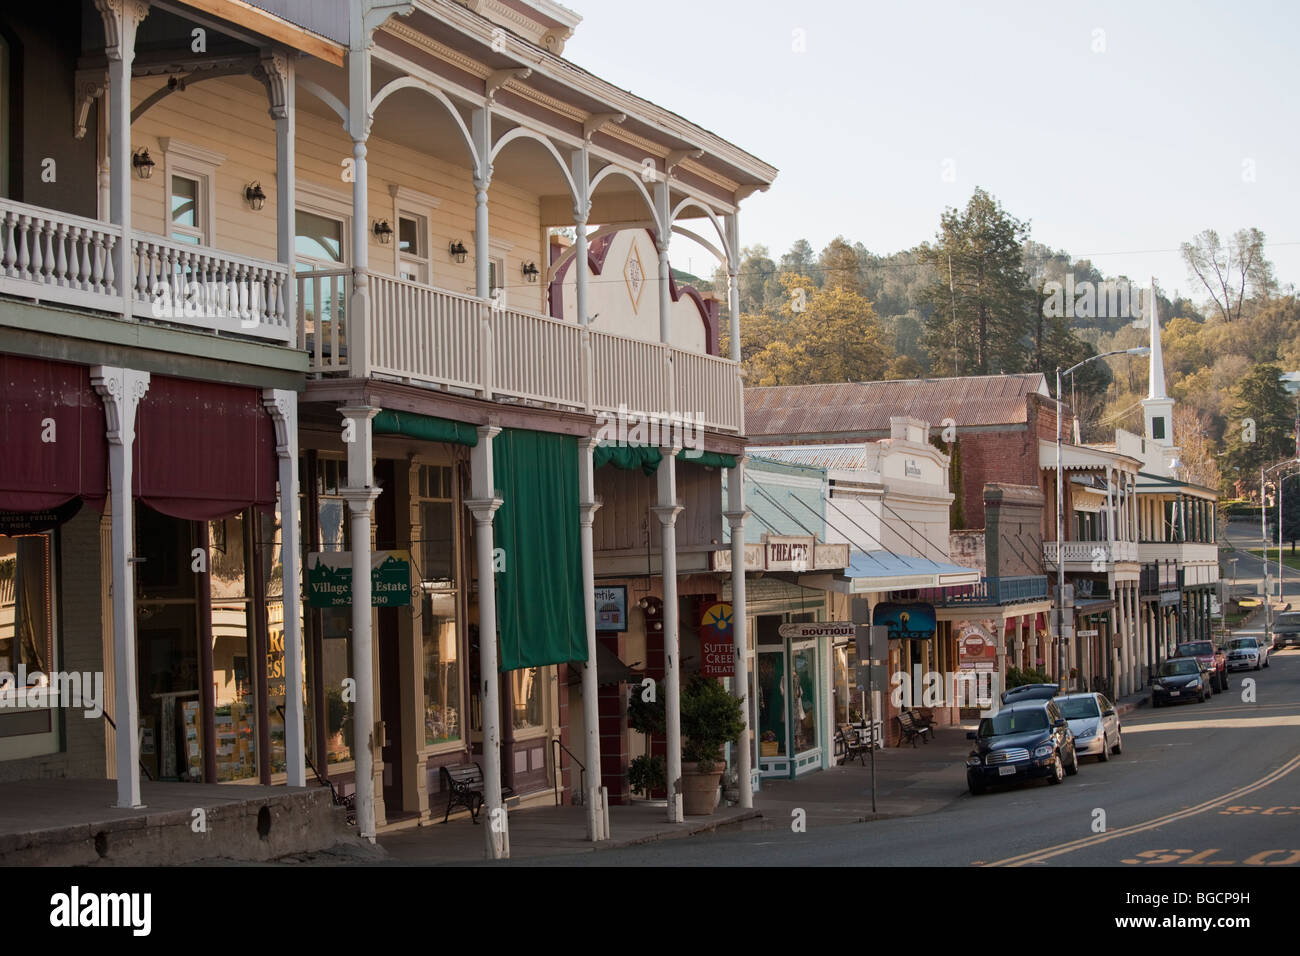 Row of preserved buildings on Main Street, Old Hwy 49, Sutter Creek, Amador County, California, USA Stock Photo